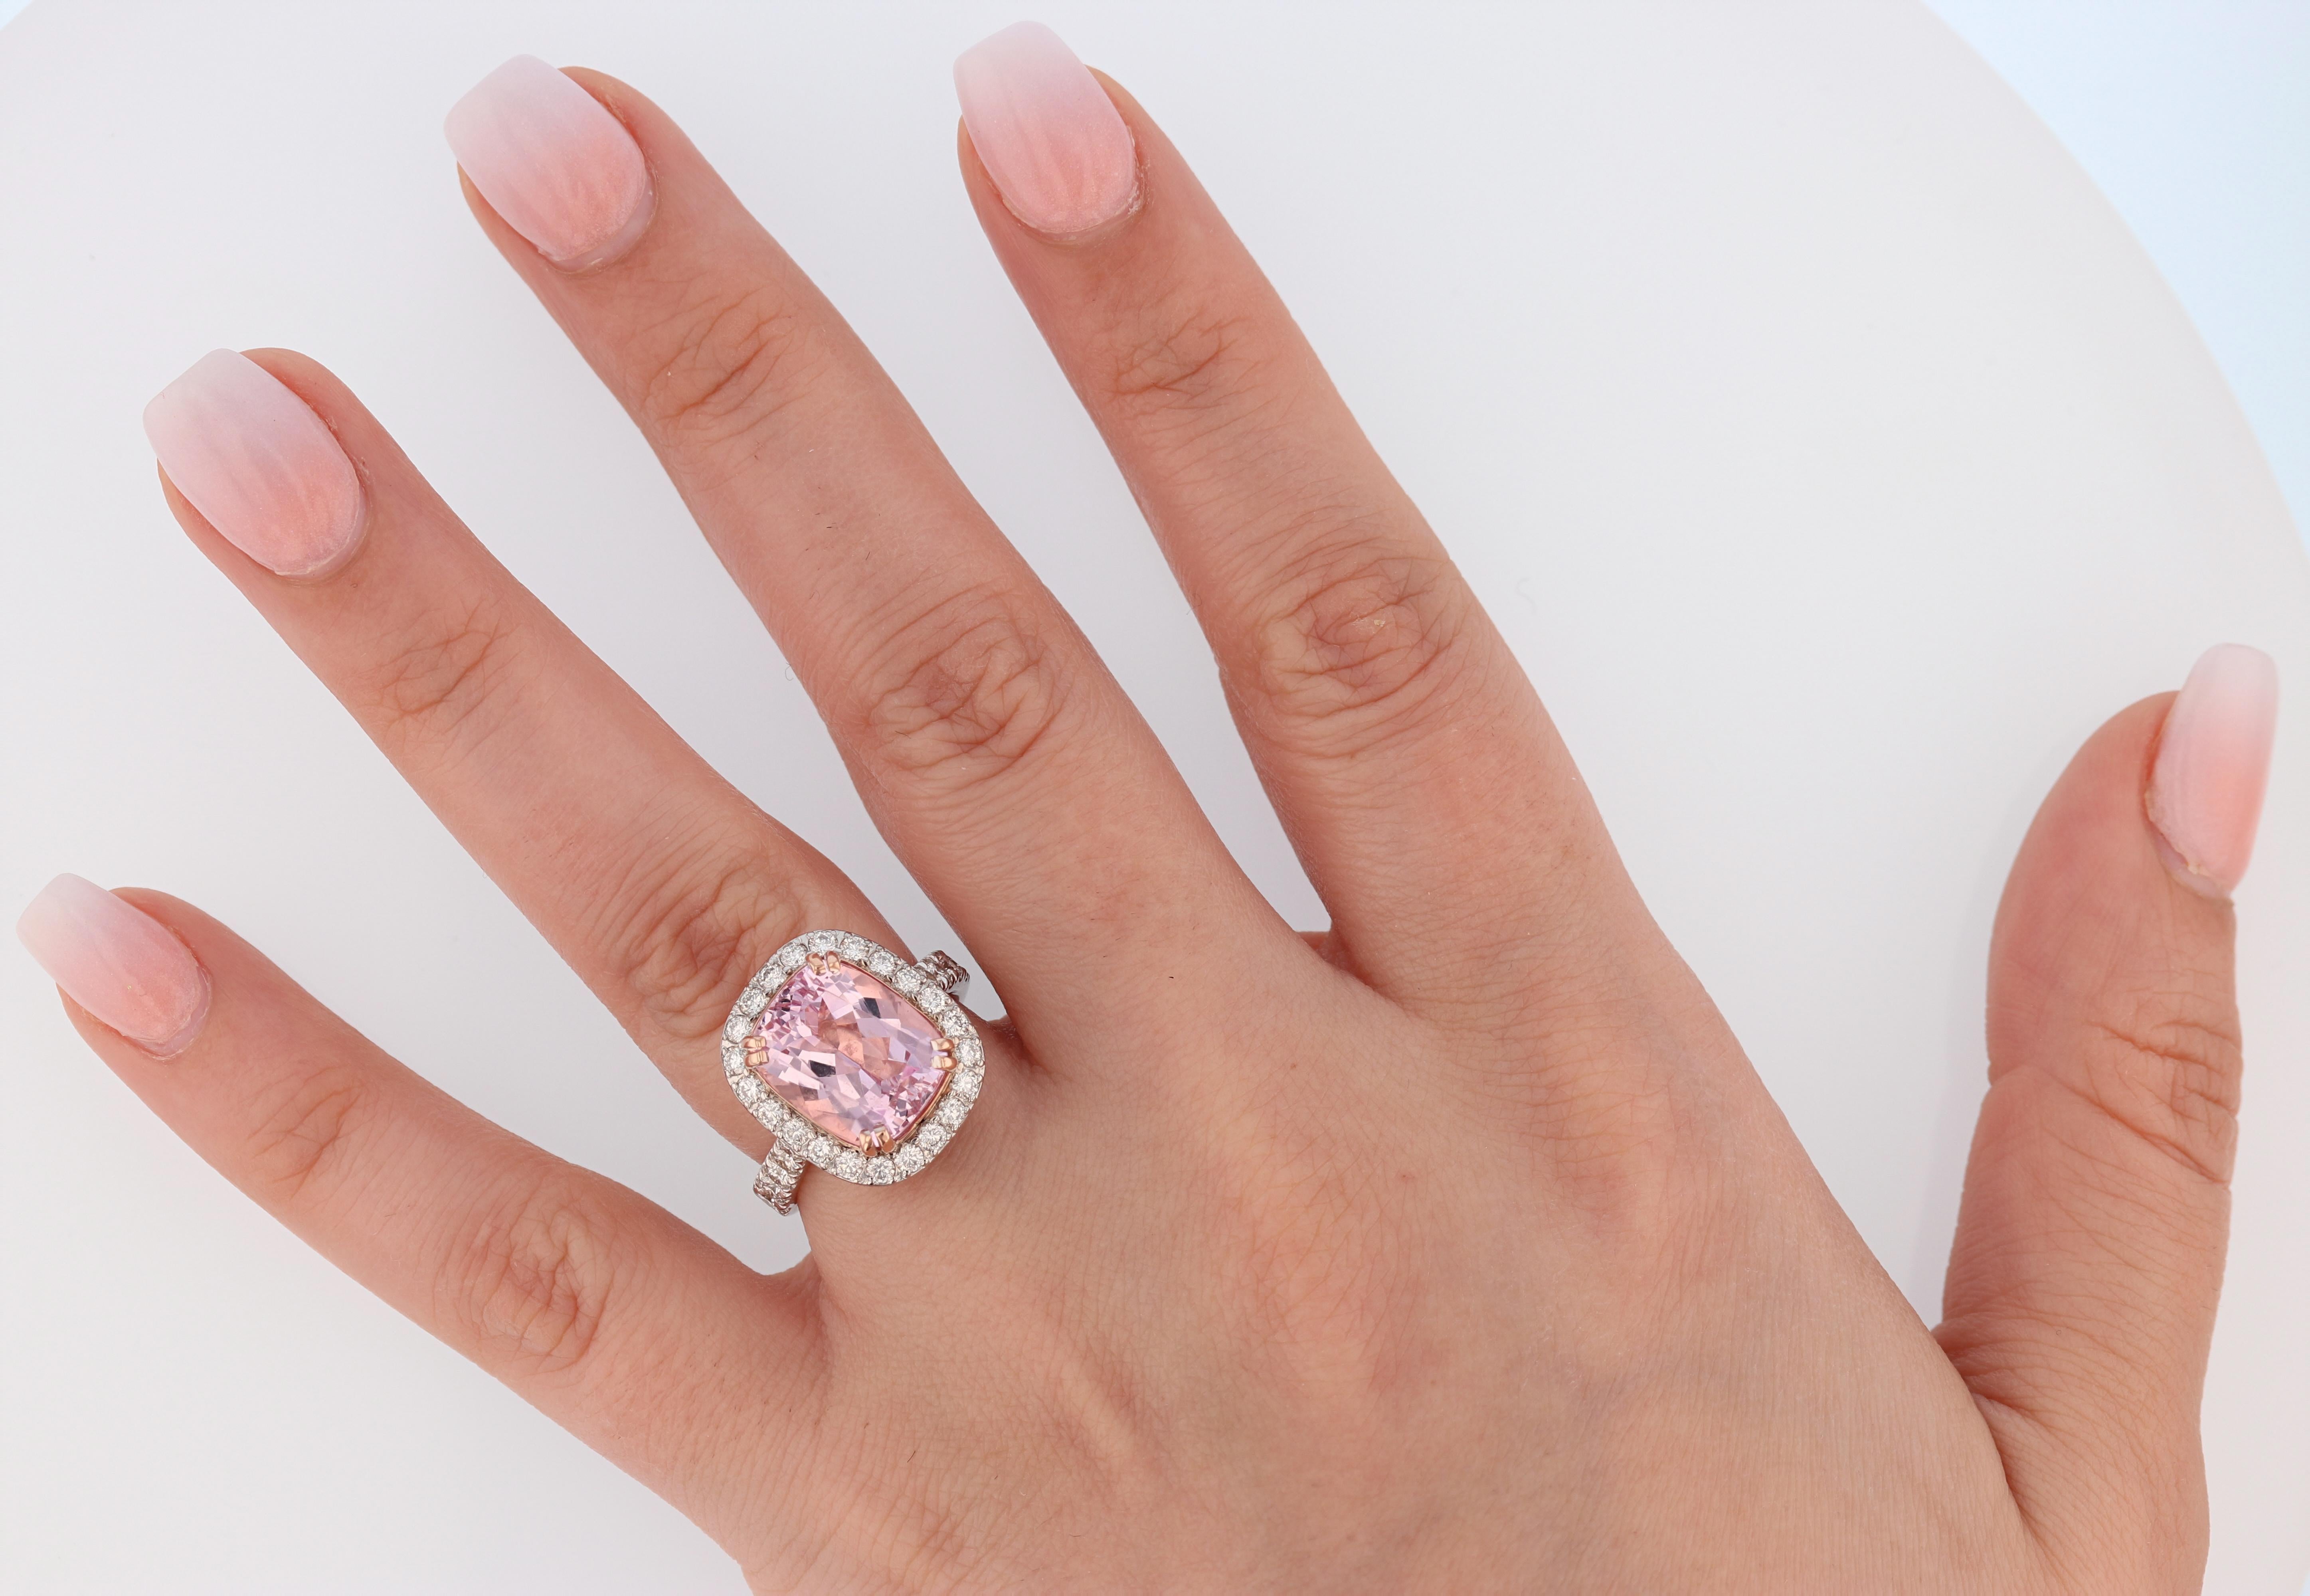 This ring is made in 14K White and Rose gold featuring 1 cushion cut Morganite weighing 5.67 ct. There are 49 round cut diamonds weighing 1.10ct prong set on the ring. This ring features a rose gold basket to give a little more pop of color to it. 